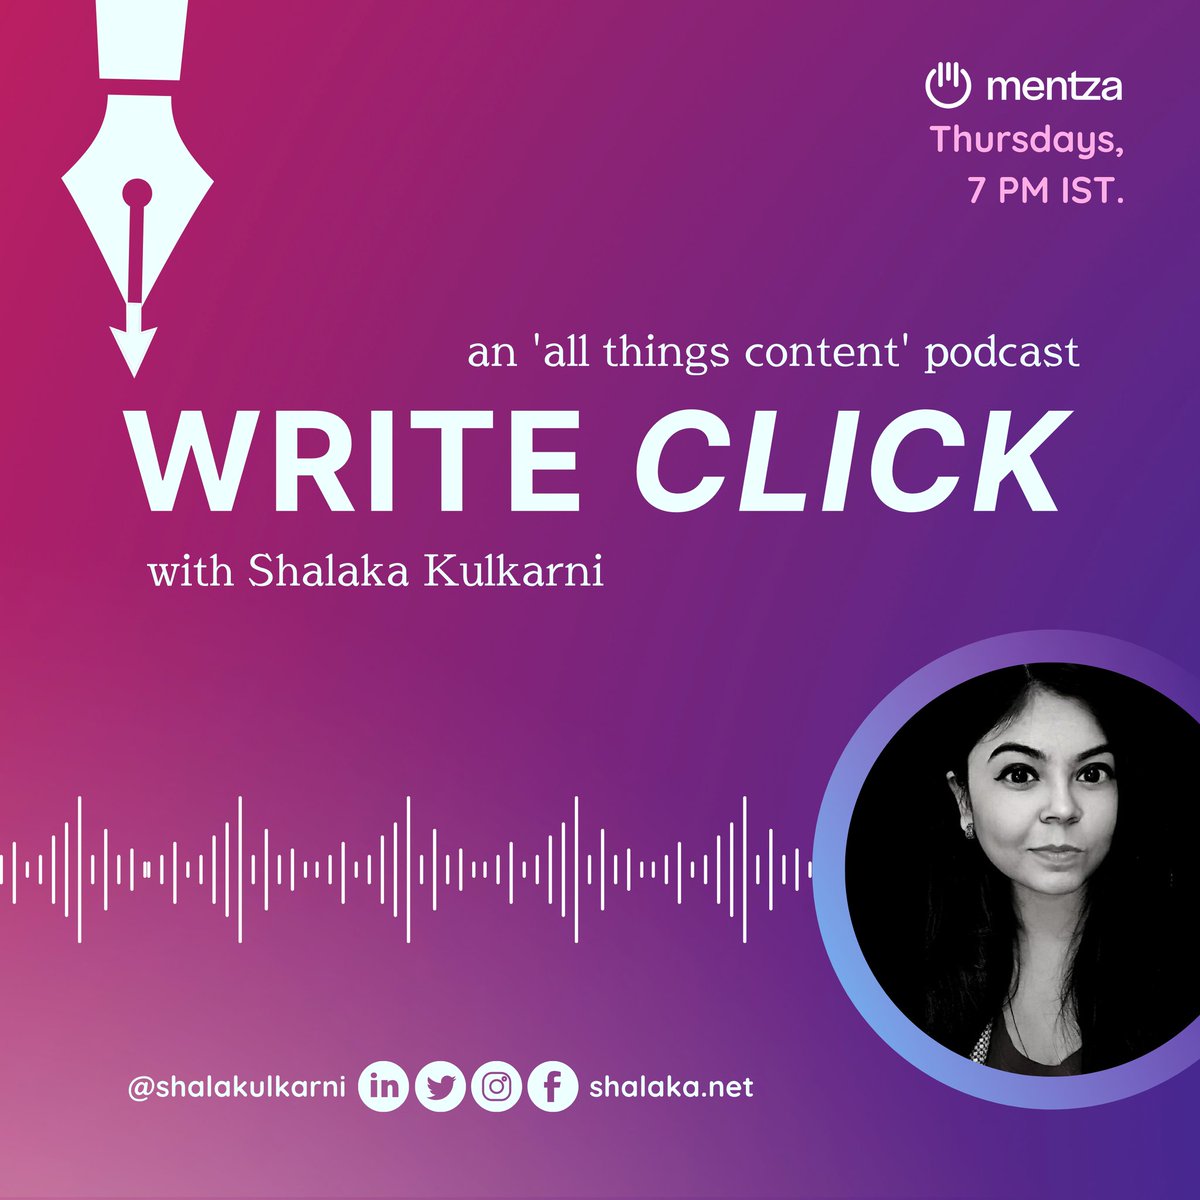 Tweeps, Starting my own #podcast channel ‘Write Click’ with Shalaka Kulkarni on @MentzaCircles. 🚀 Will talk about ‘all things content’ – from storytelling, publishing to neuromarketing & everything in between. Kicking this off on May 19 at 7 PM 🎙️Link: bit.ly/write-click